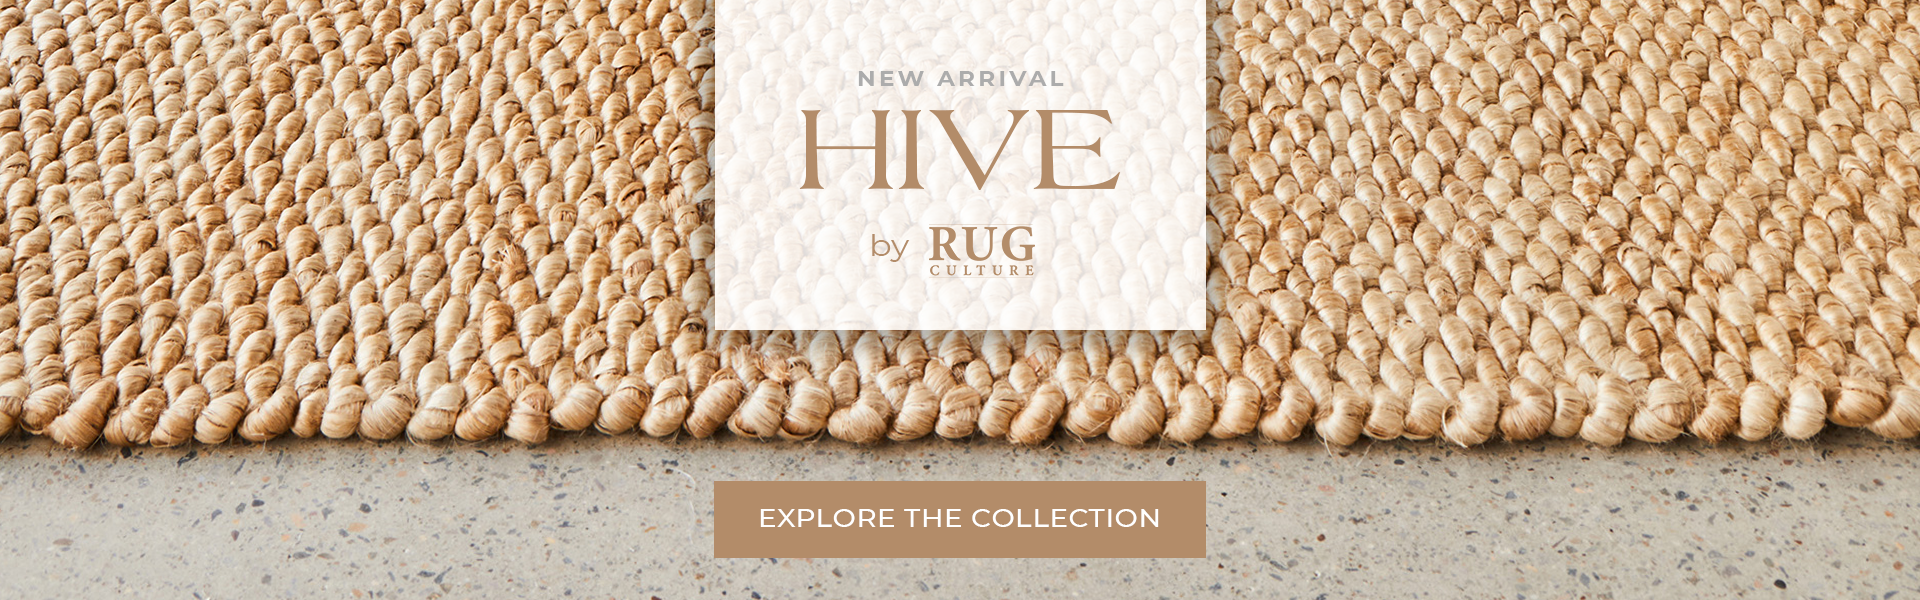 New Arrival HIVE 02